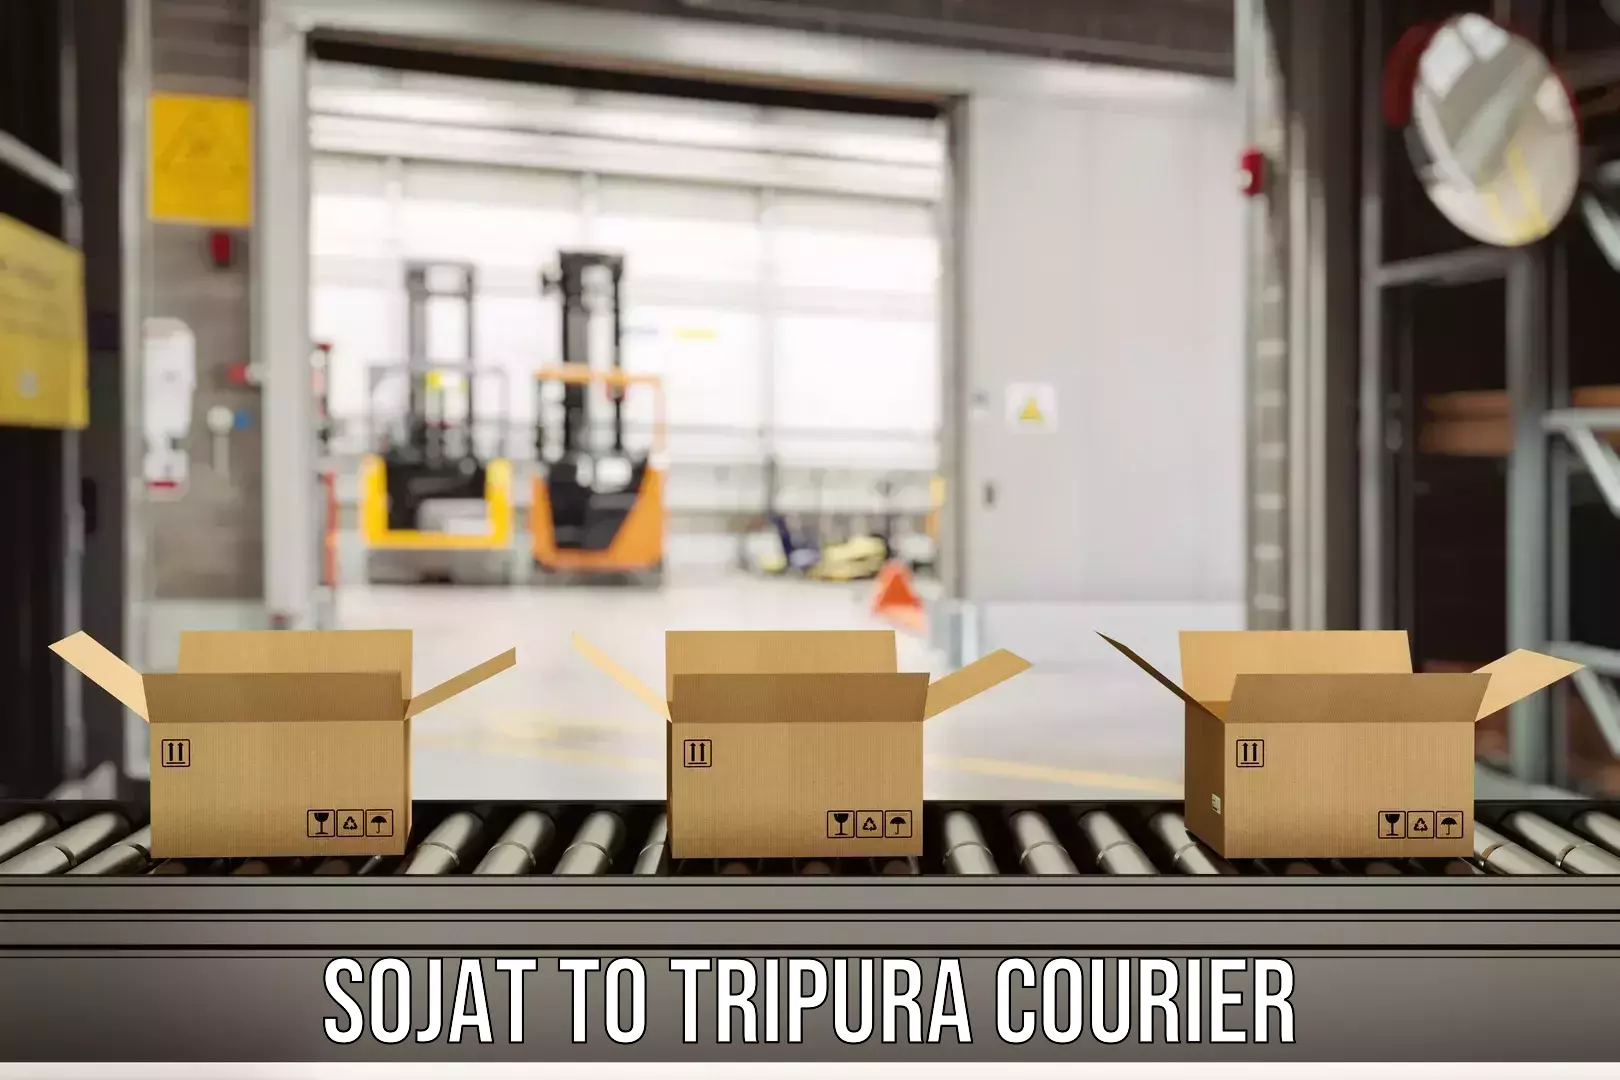 Customized delivery options in Sojat to Tripura